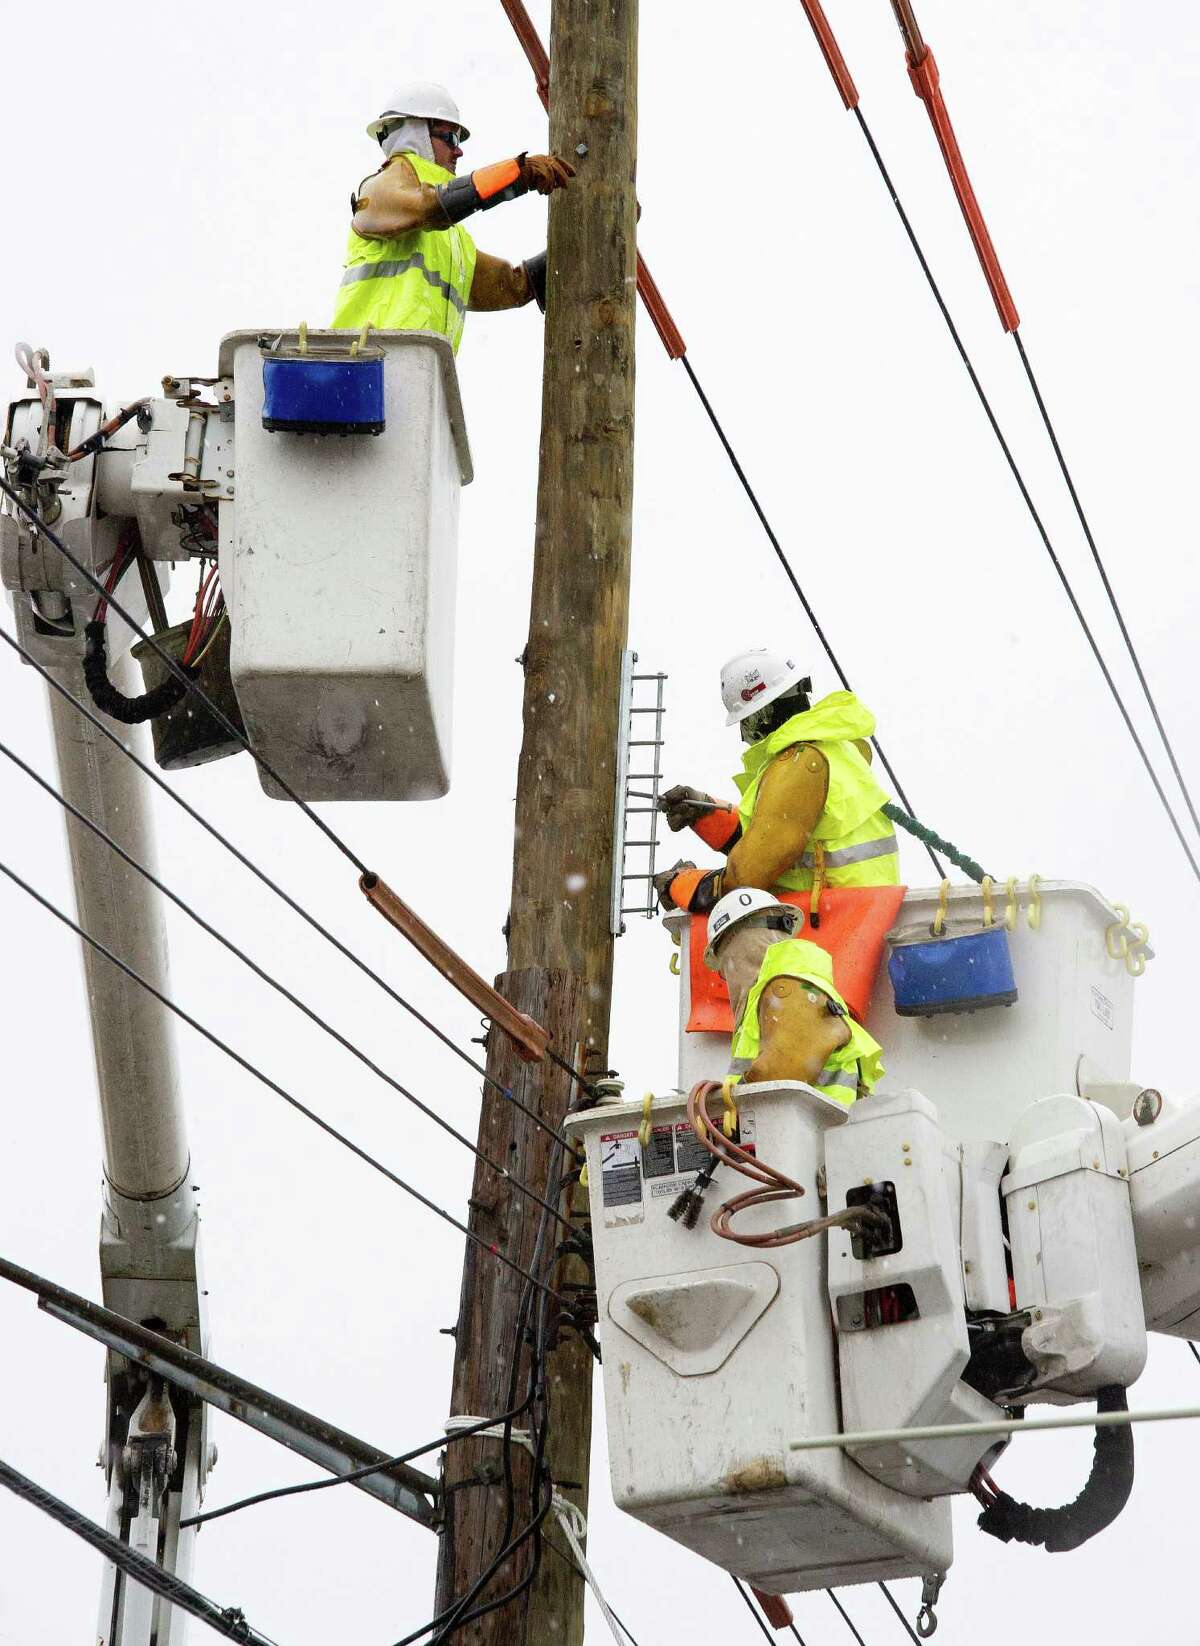 Linemen from Chain Electric, a contract utility crew that drove in from Mississippi , works to prep a utility pole November 7, 2012 for a new transformer and help to restore electric power that has been out since Hurricane Sandy struck the East Coast, in the community of Oakwood Beach, on Staten Island, New York. AFP PHOTO/Paul J. RichardsPAUL J. RICHARDS/AFP/Getty Images